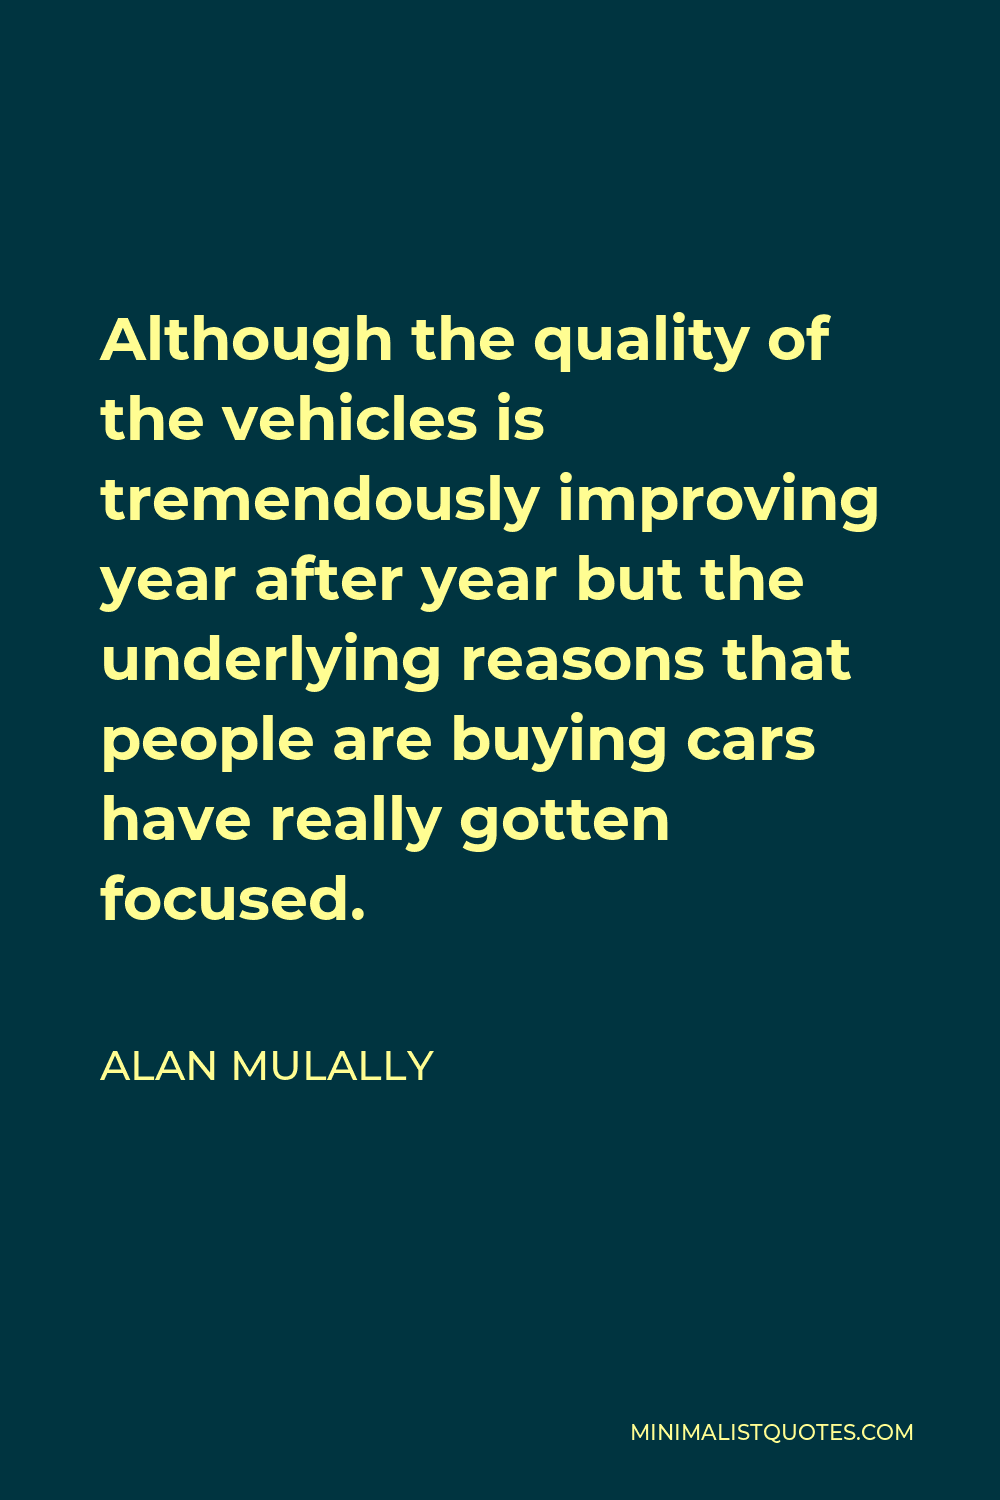 Alan Mulally Quote - Although the quality of the vehicles is tremendously improving year after year but the underlying reasons that people are buying cars have really gotten focused.